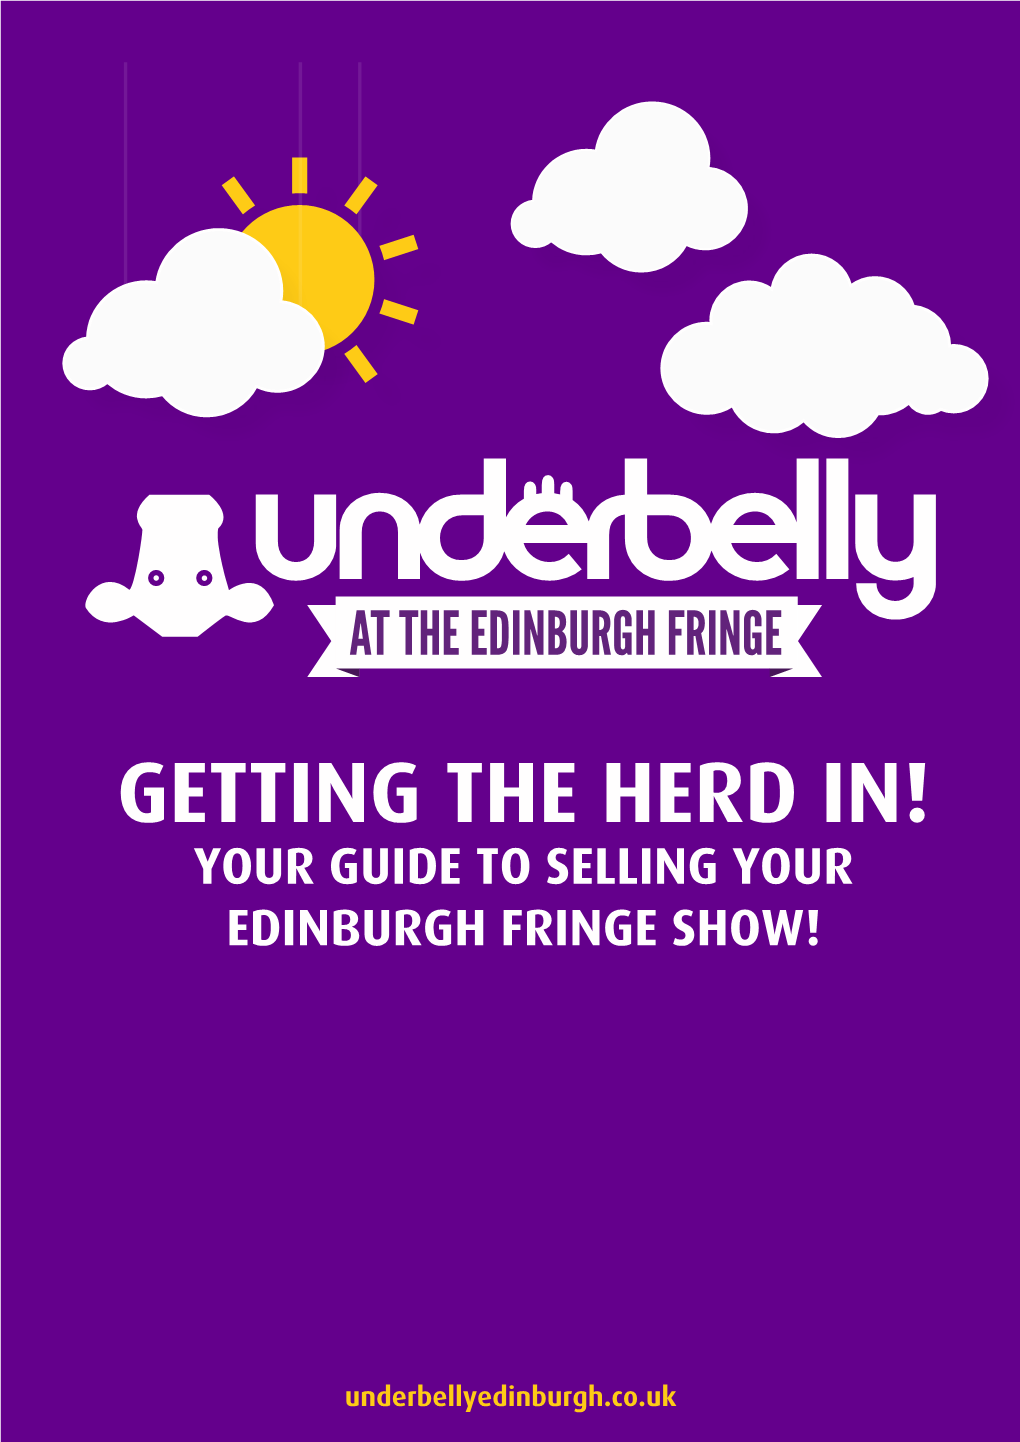 Getting the Herd In! Your Guide to Selling Your Edinburgh Fringe Show!